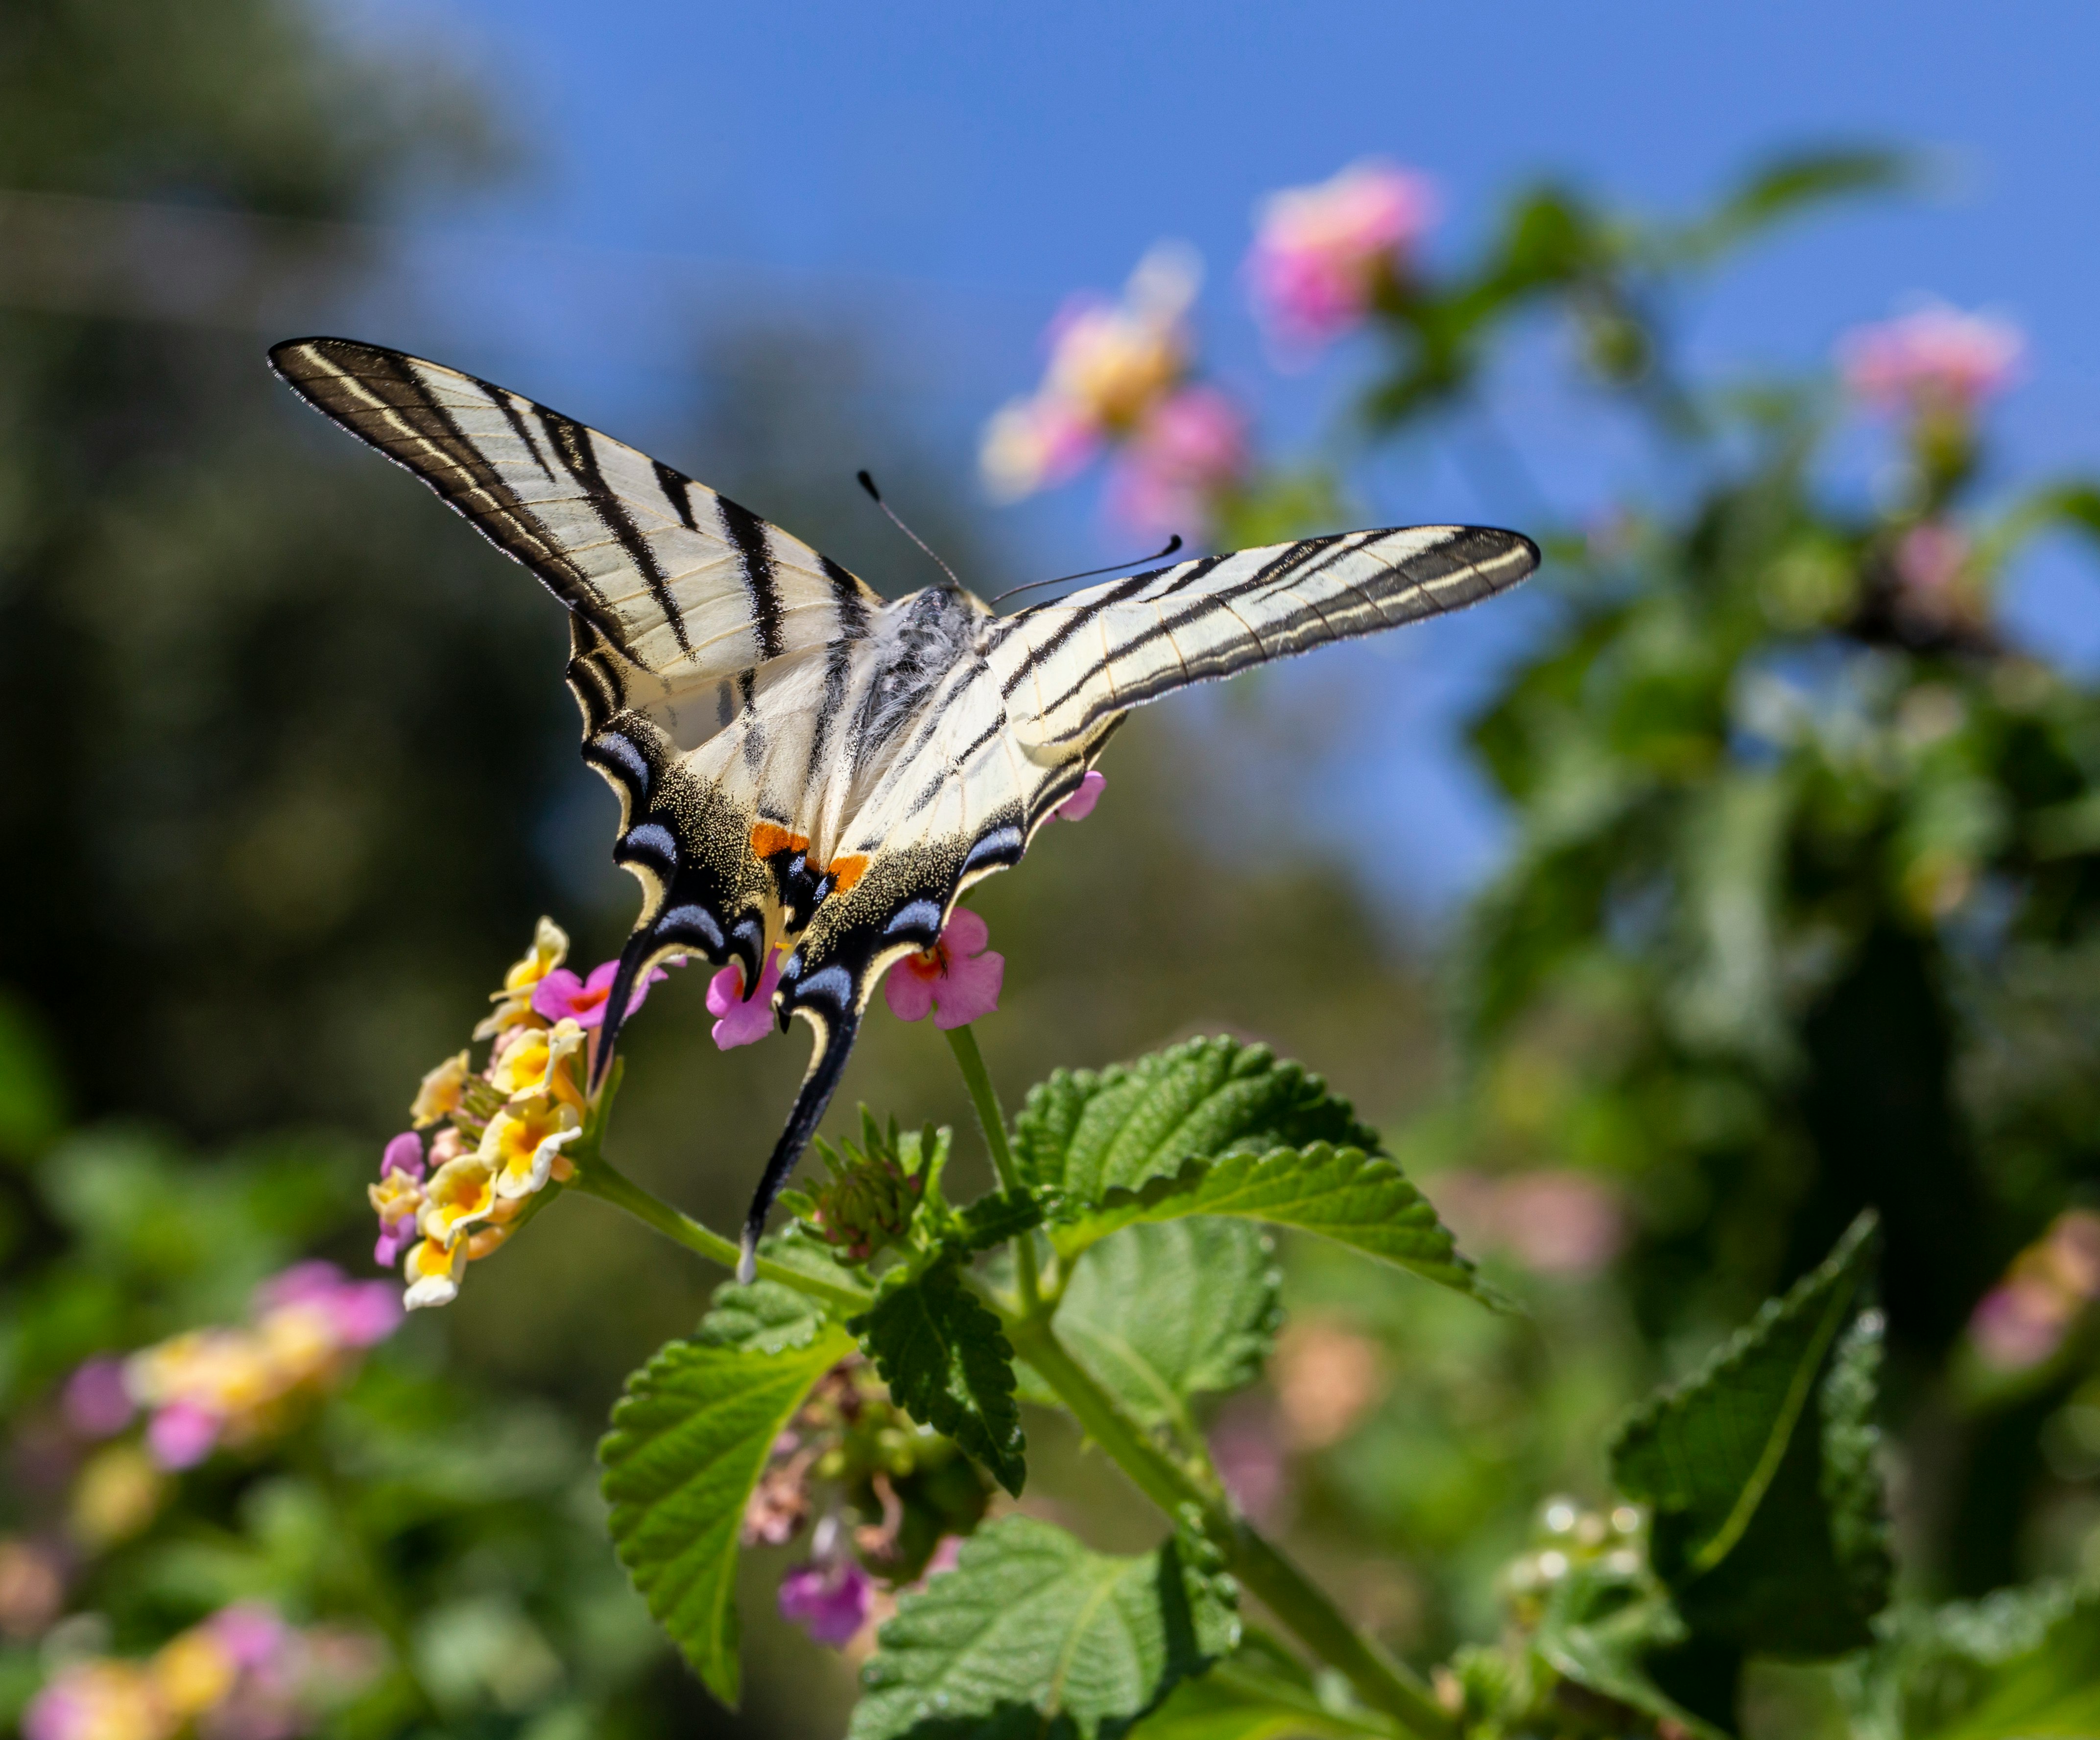 black and white butterfly perched on yellow and pink flower in close up photography during daytime